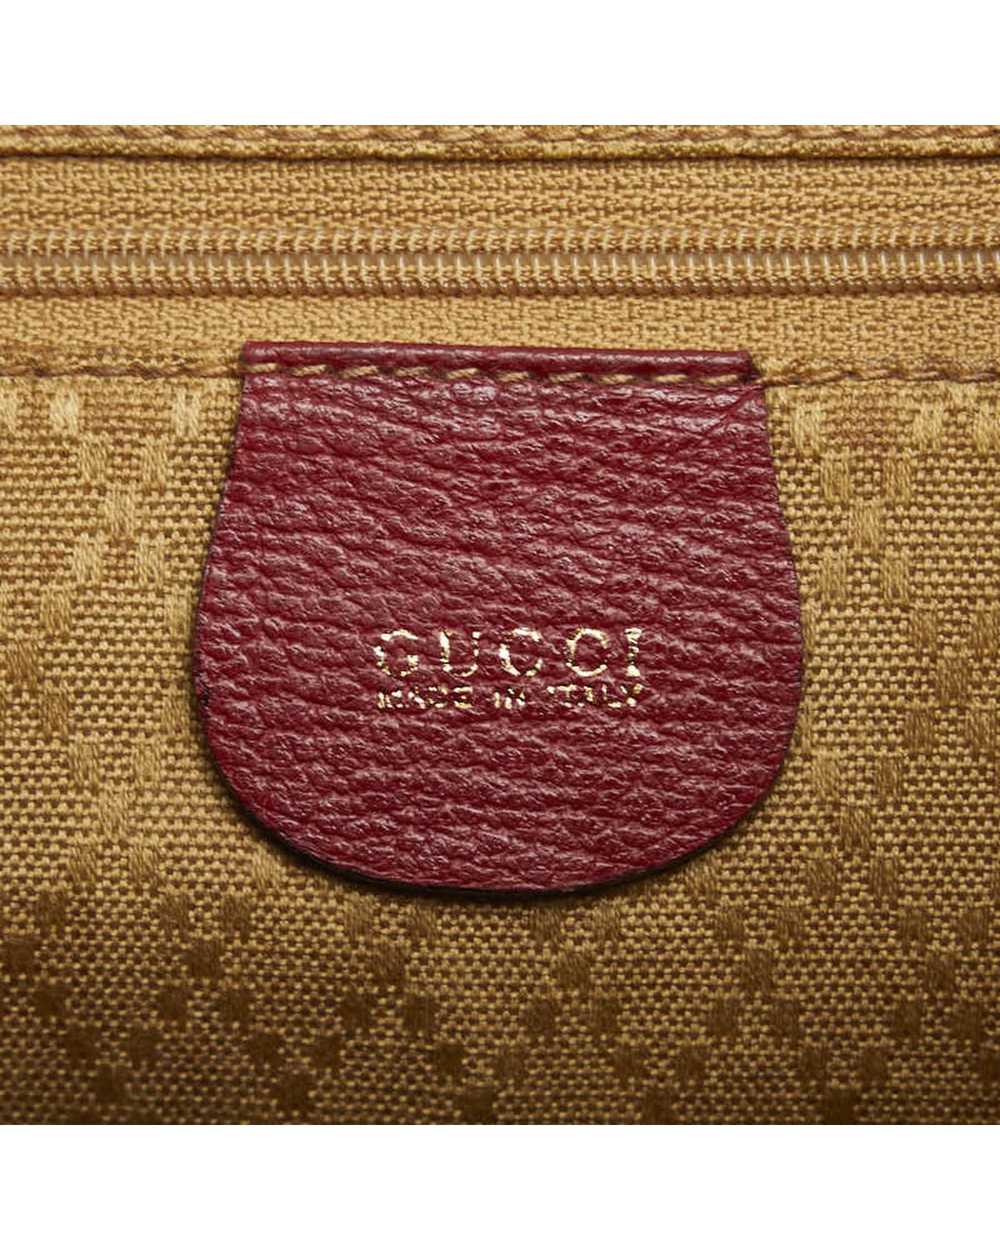 Gucci Red Suede Bamboo Backpack Bag - image 10